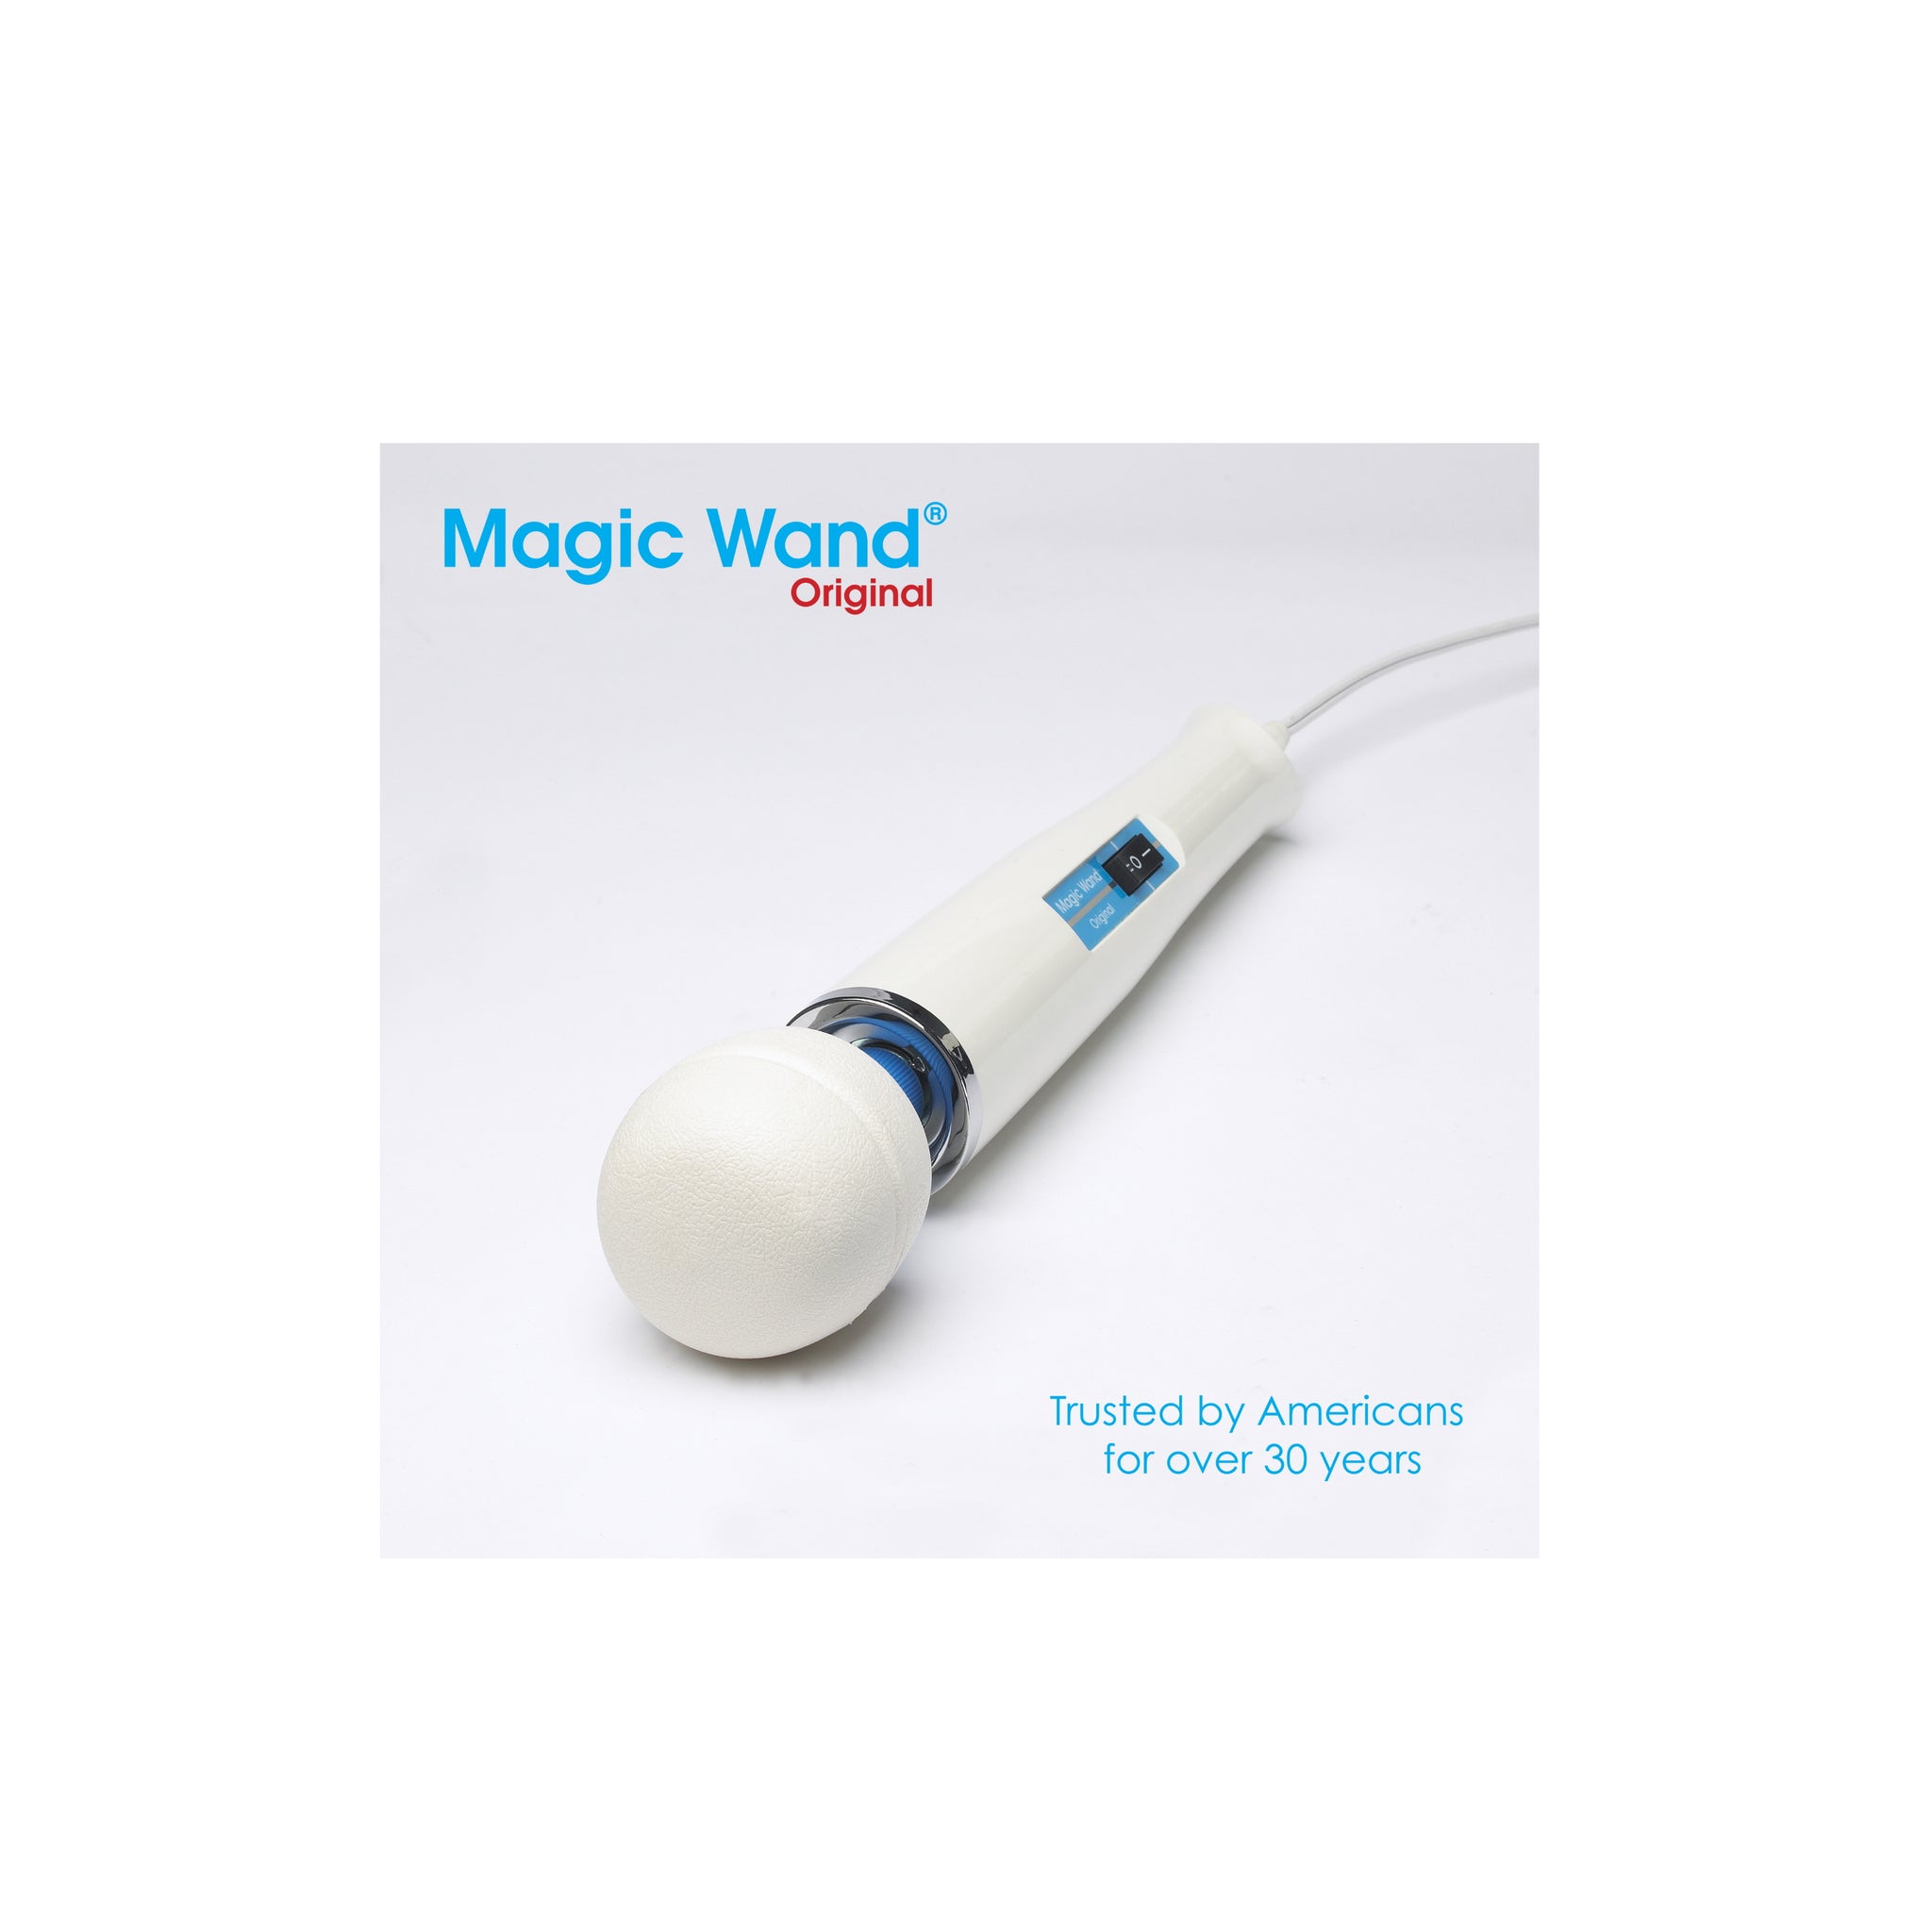 Original Magic Wand by Vibratex with IntiMD Trigger Pin Point Attachment